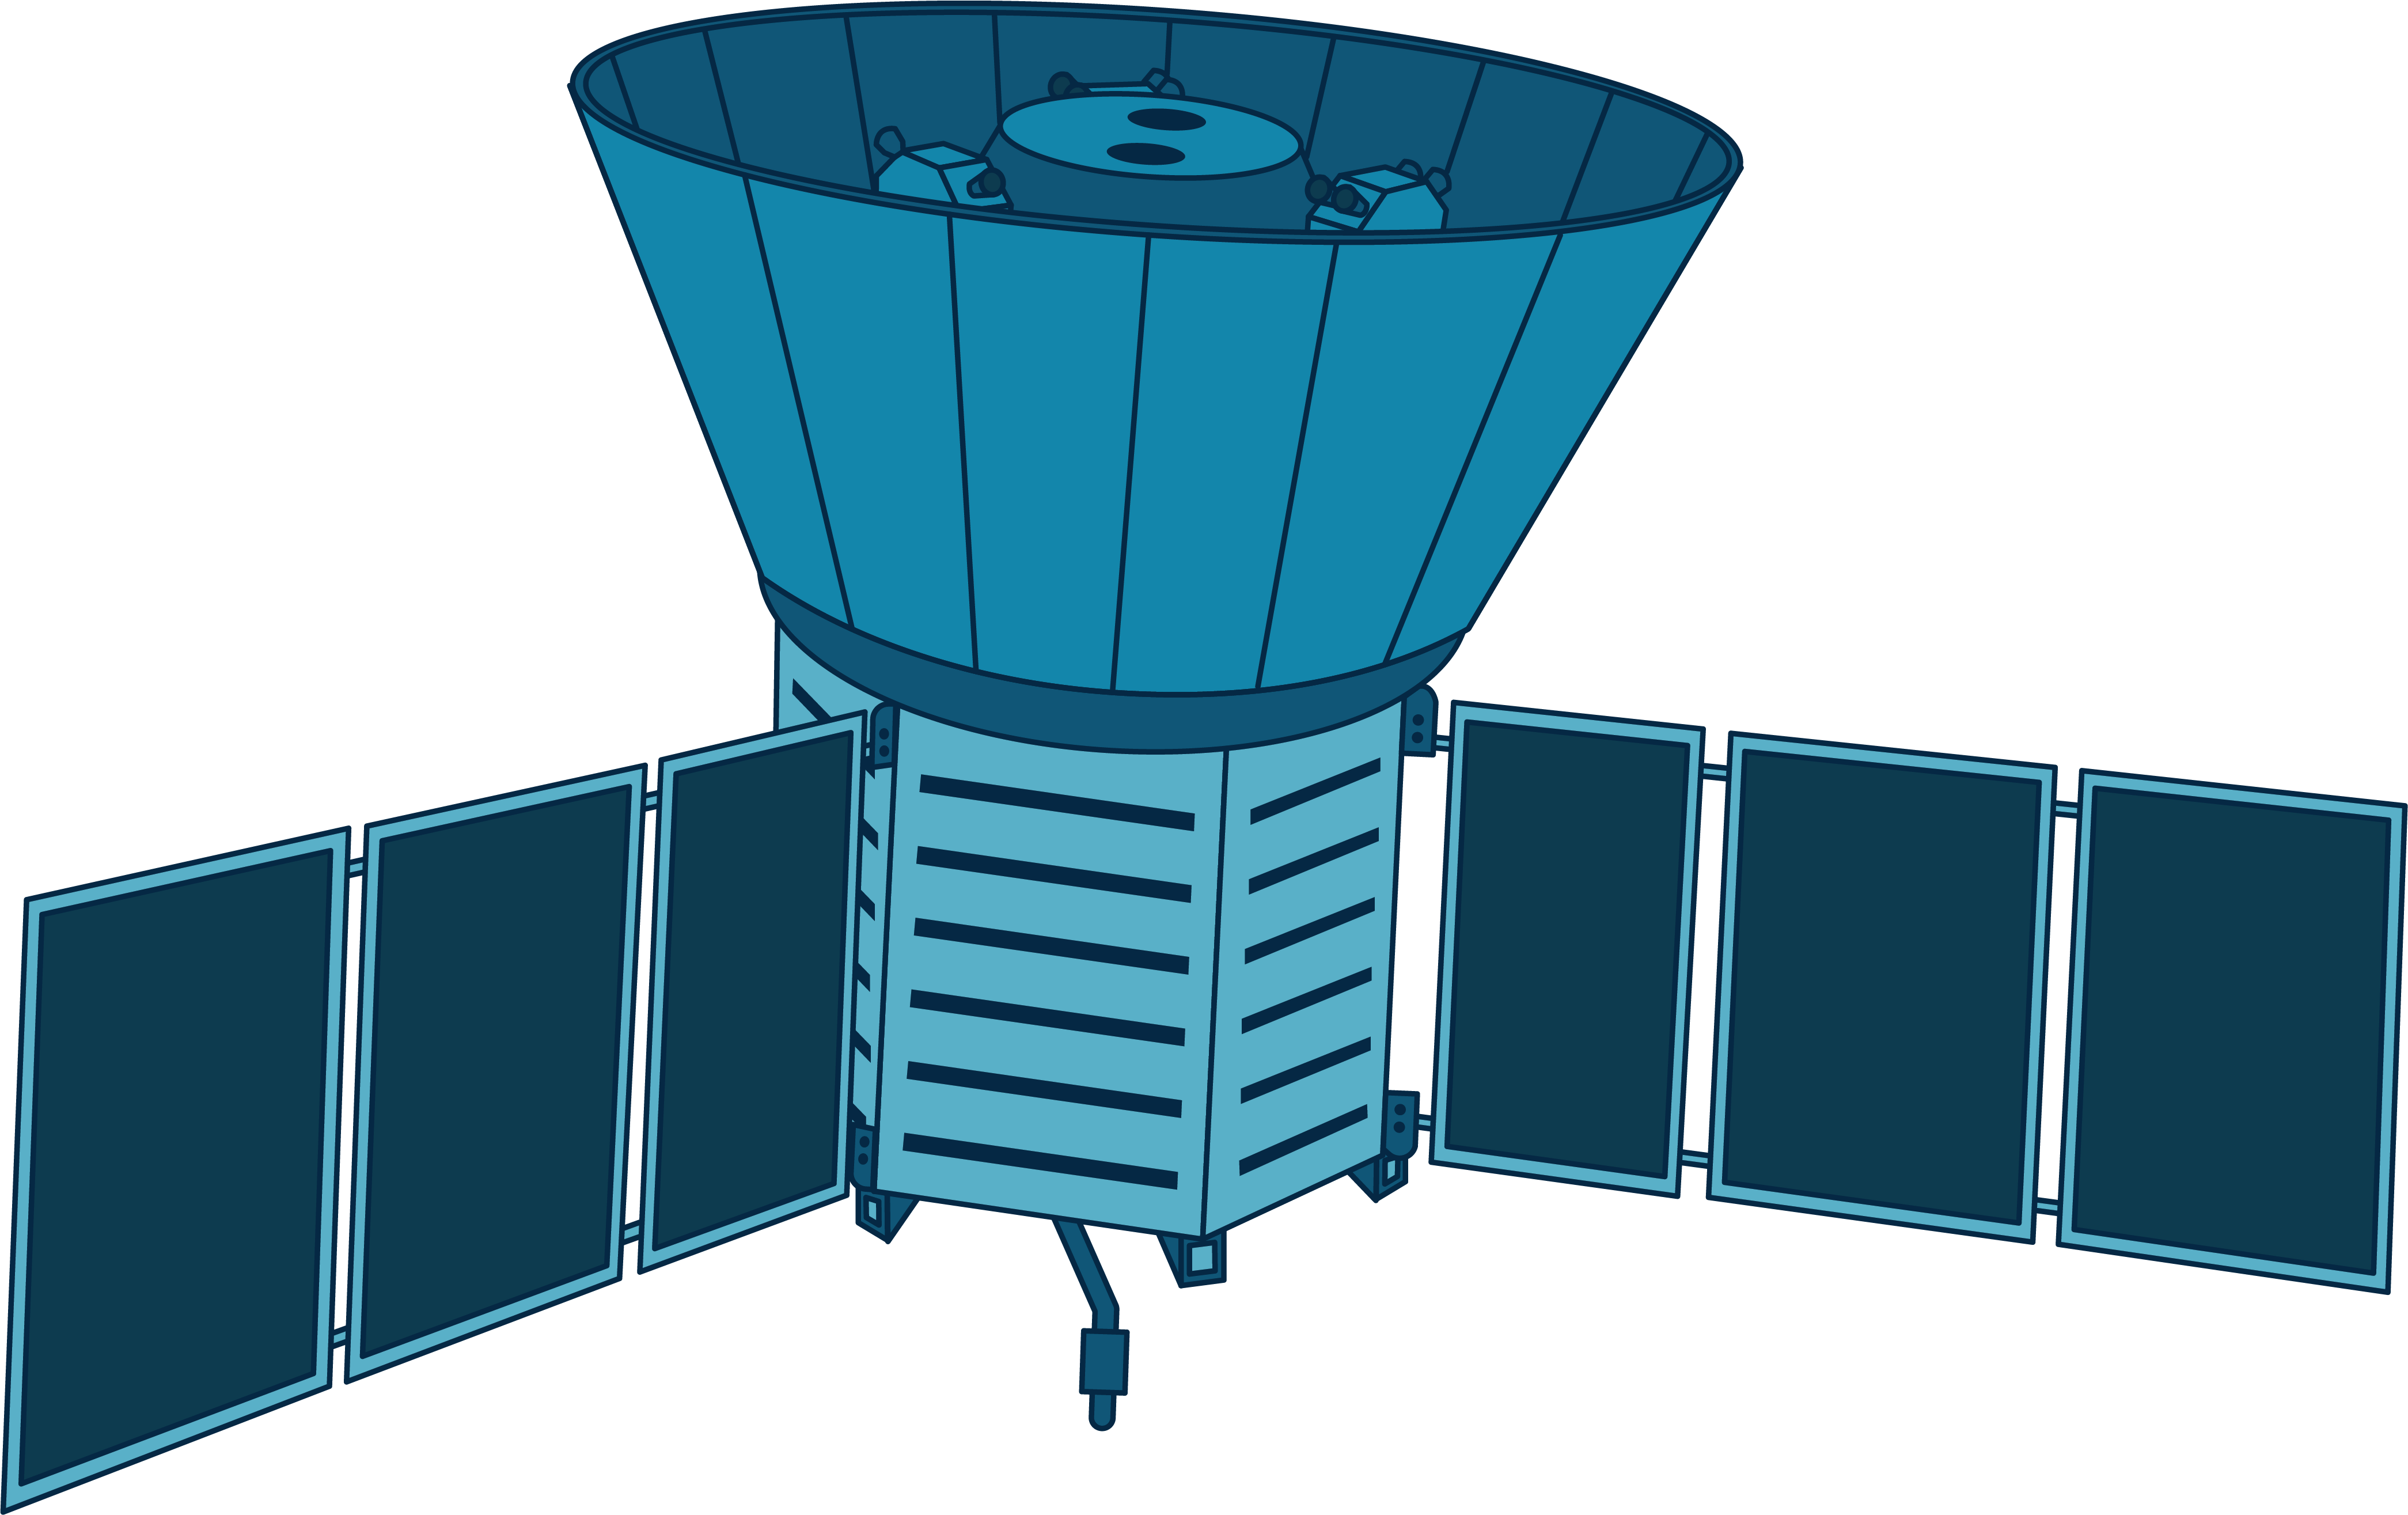 COBE is illustrated in light and dark blues. With two wings made up of three rectangular solar arrays each, the spacecraft's main body is made up of a striped, multi-sided cylinder with an attached cone-shaped structure on top.